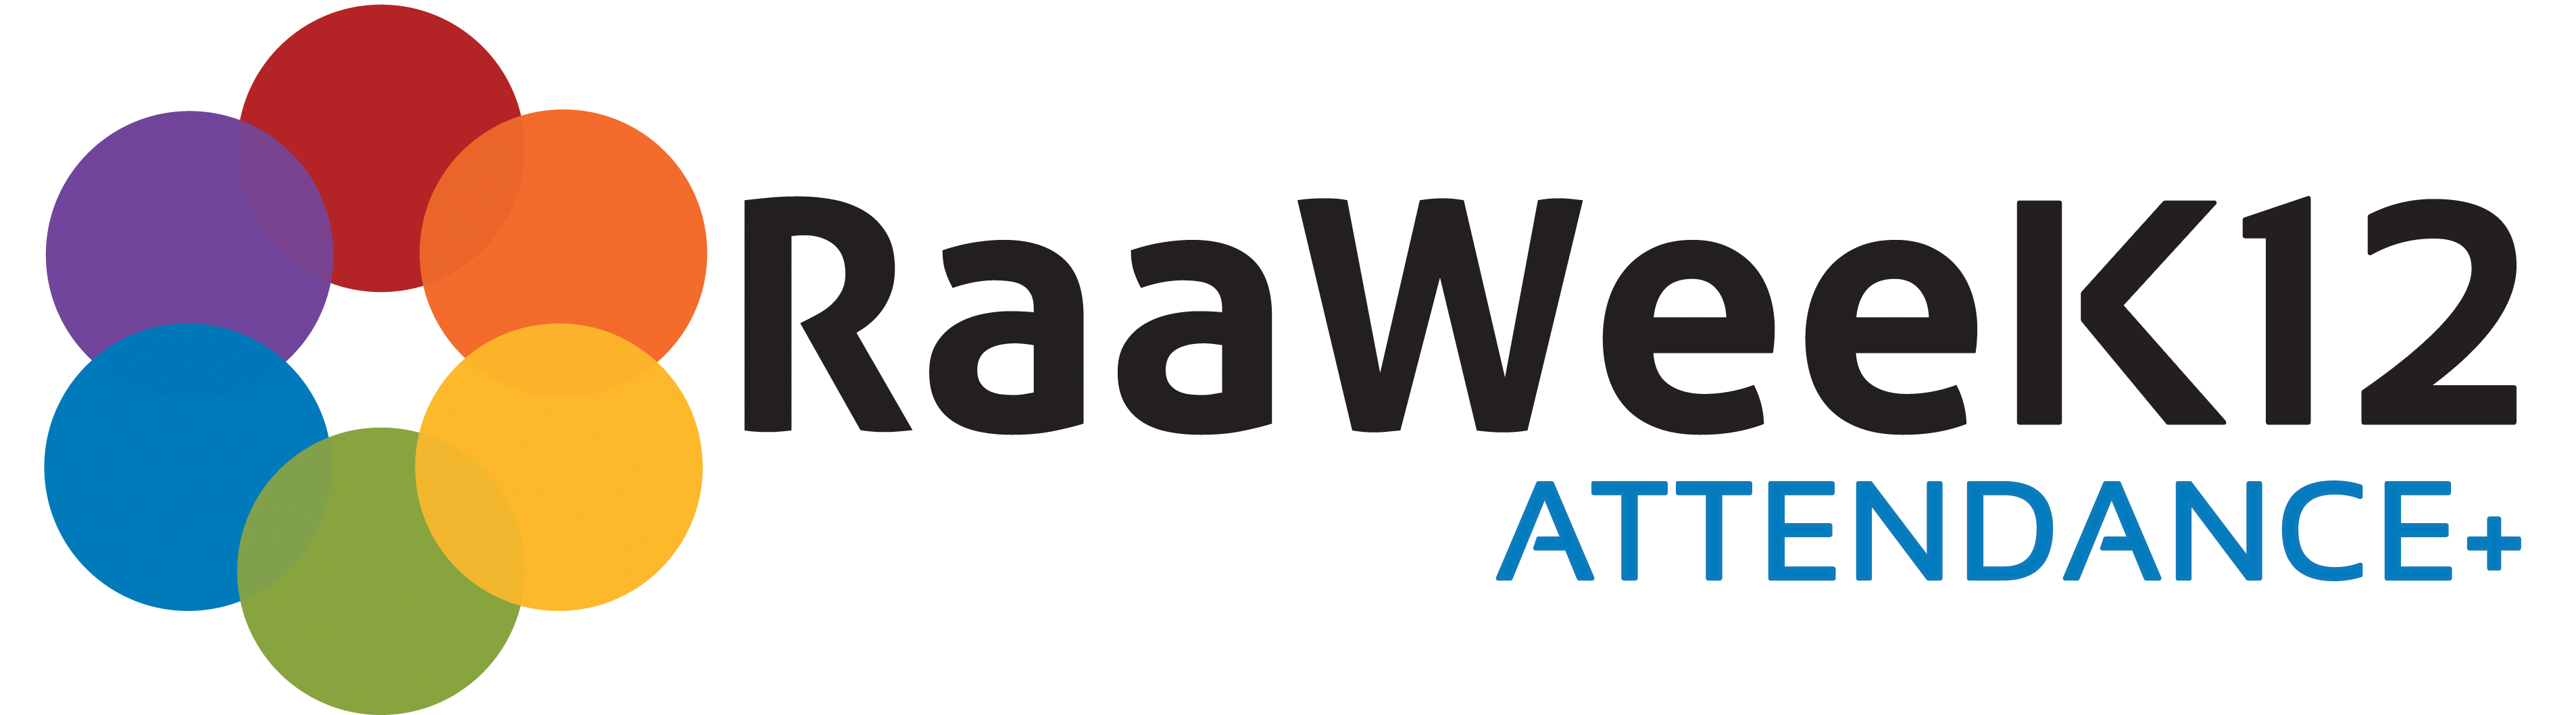 RaaWee K12 Solutions for Chronic Absenteeism, Truancy & Tardy